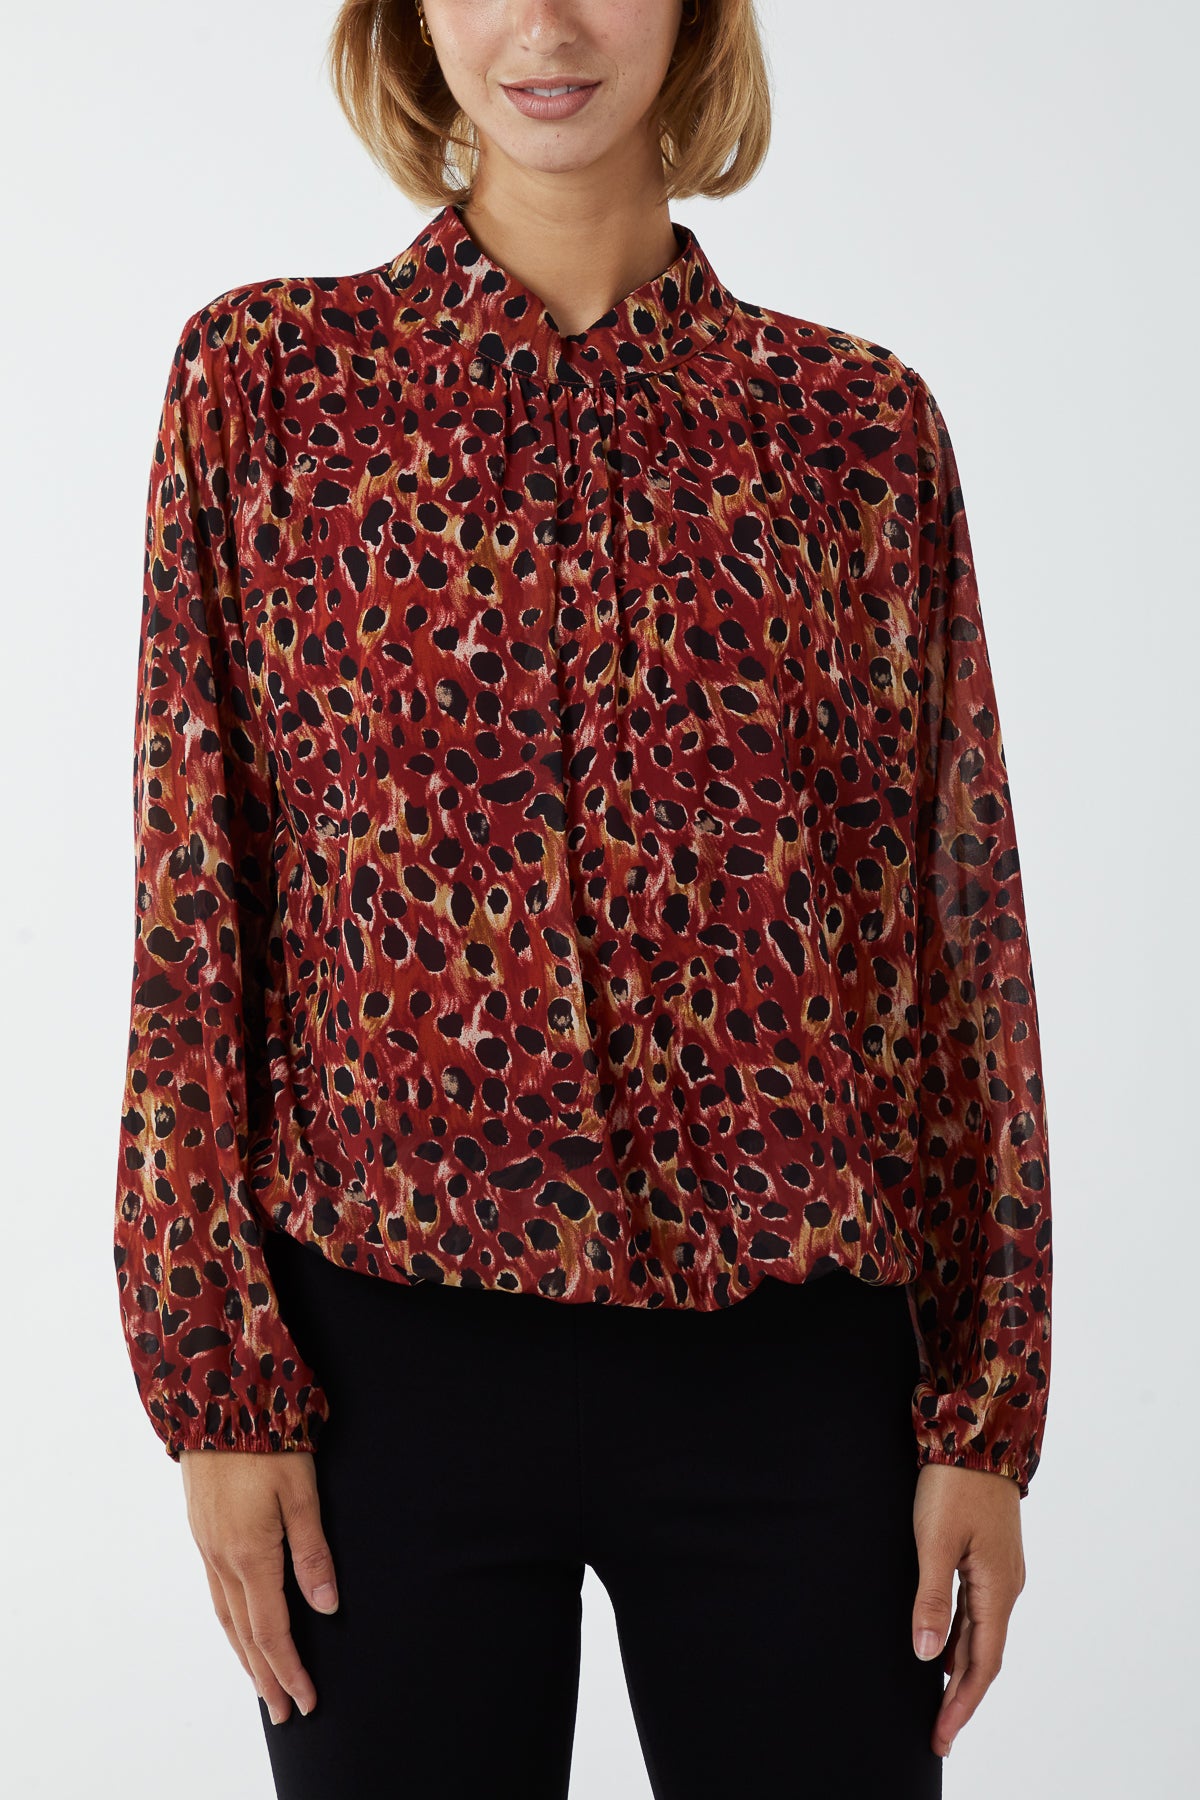 Abstract Leopard Print High Neck Blouse